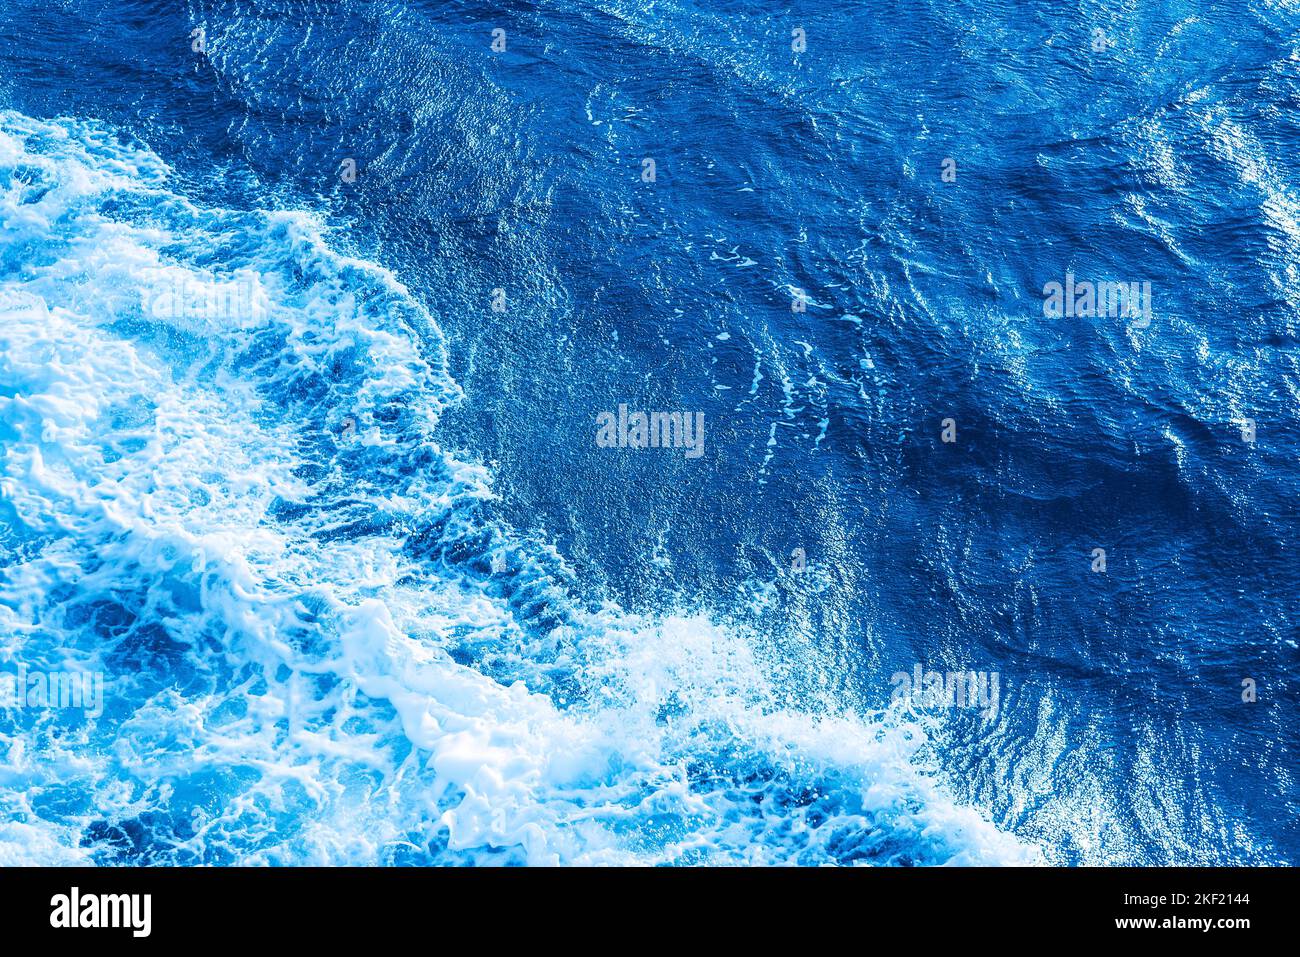 Aerial Ocean water blue surface with foam and waves. Stock Photo